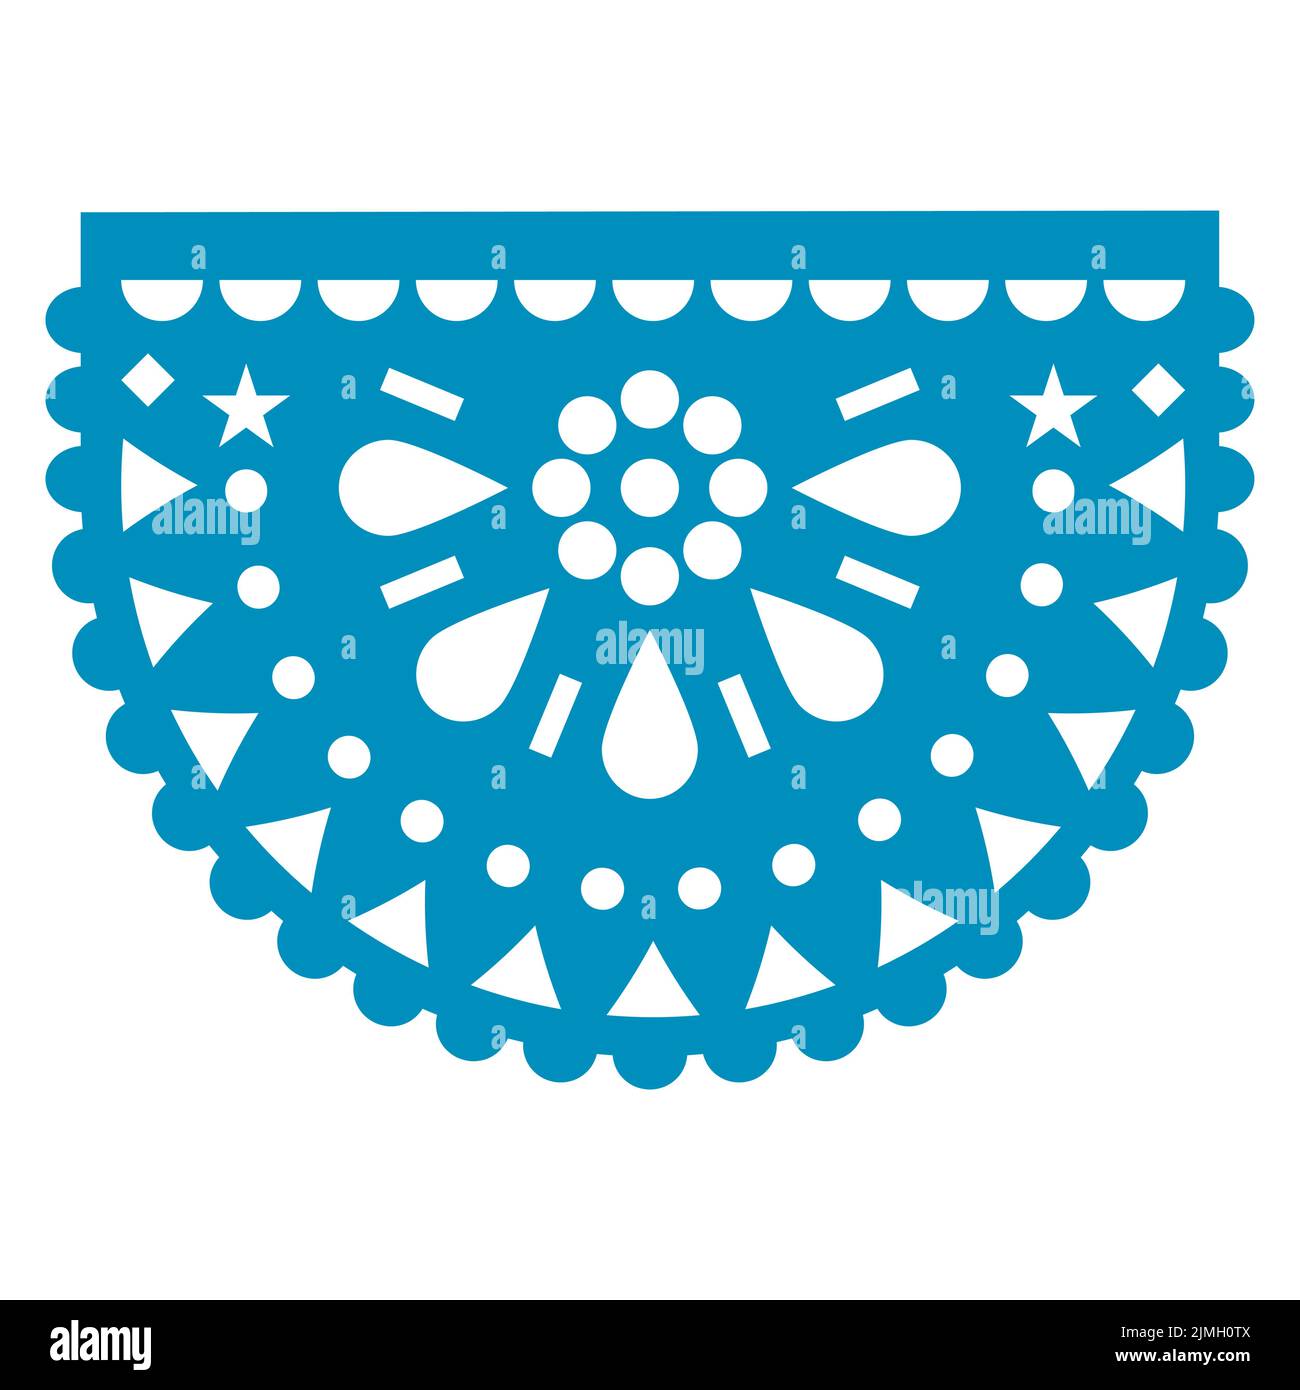 Papel Picado vector round design with floral mandala, Mexican fiesta garland decor with flowers and geometric shapes in blue Stock Vector